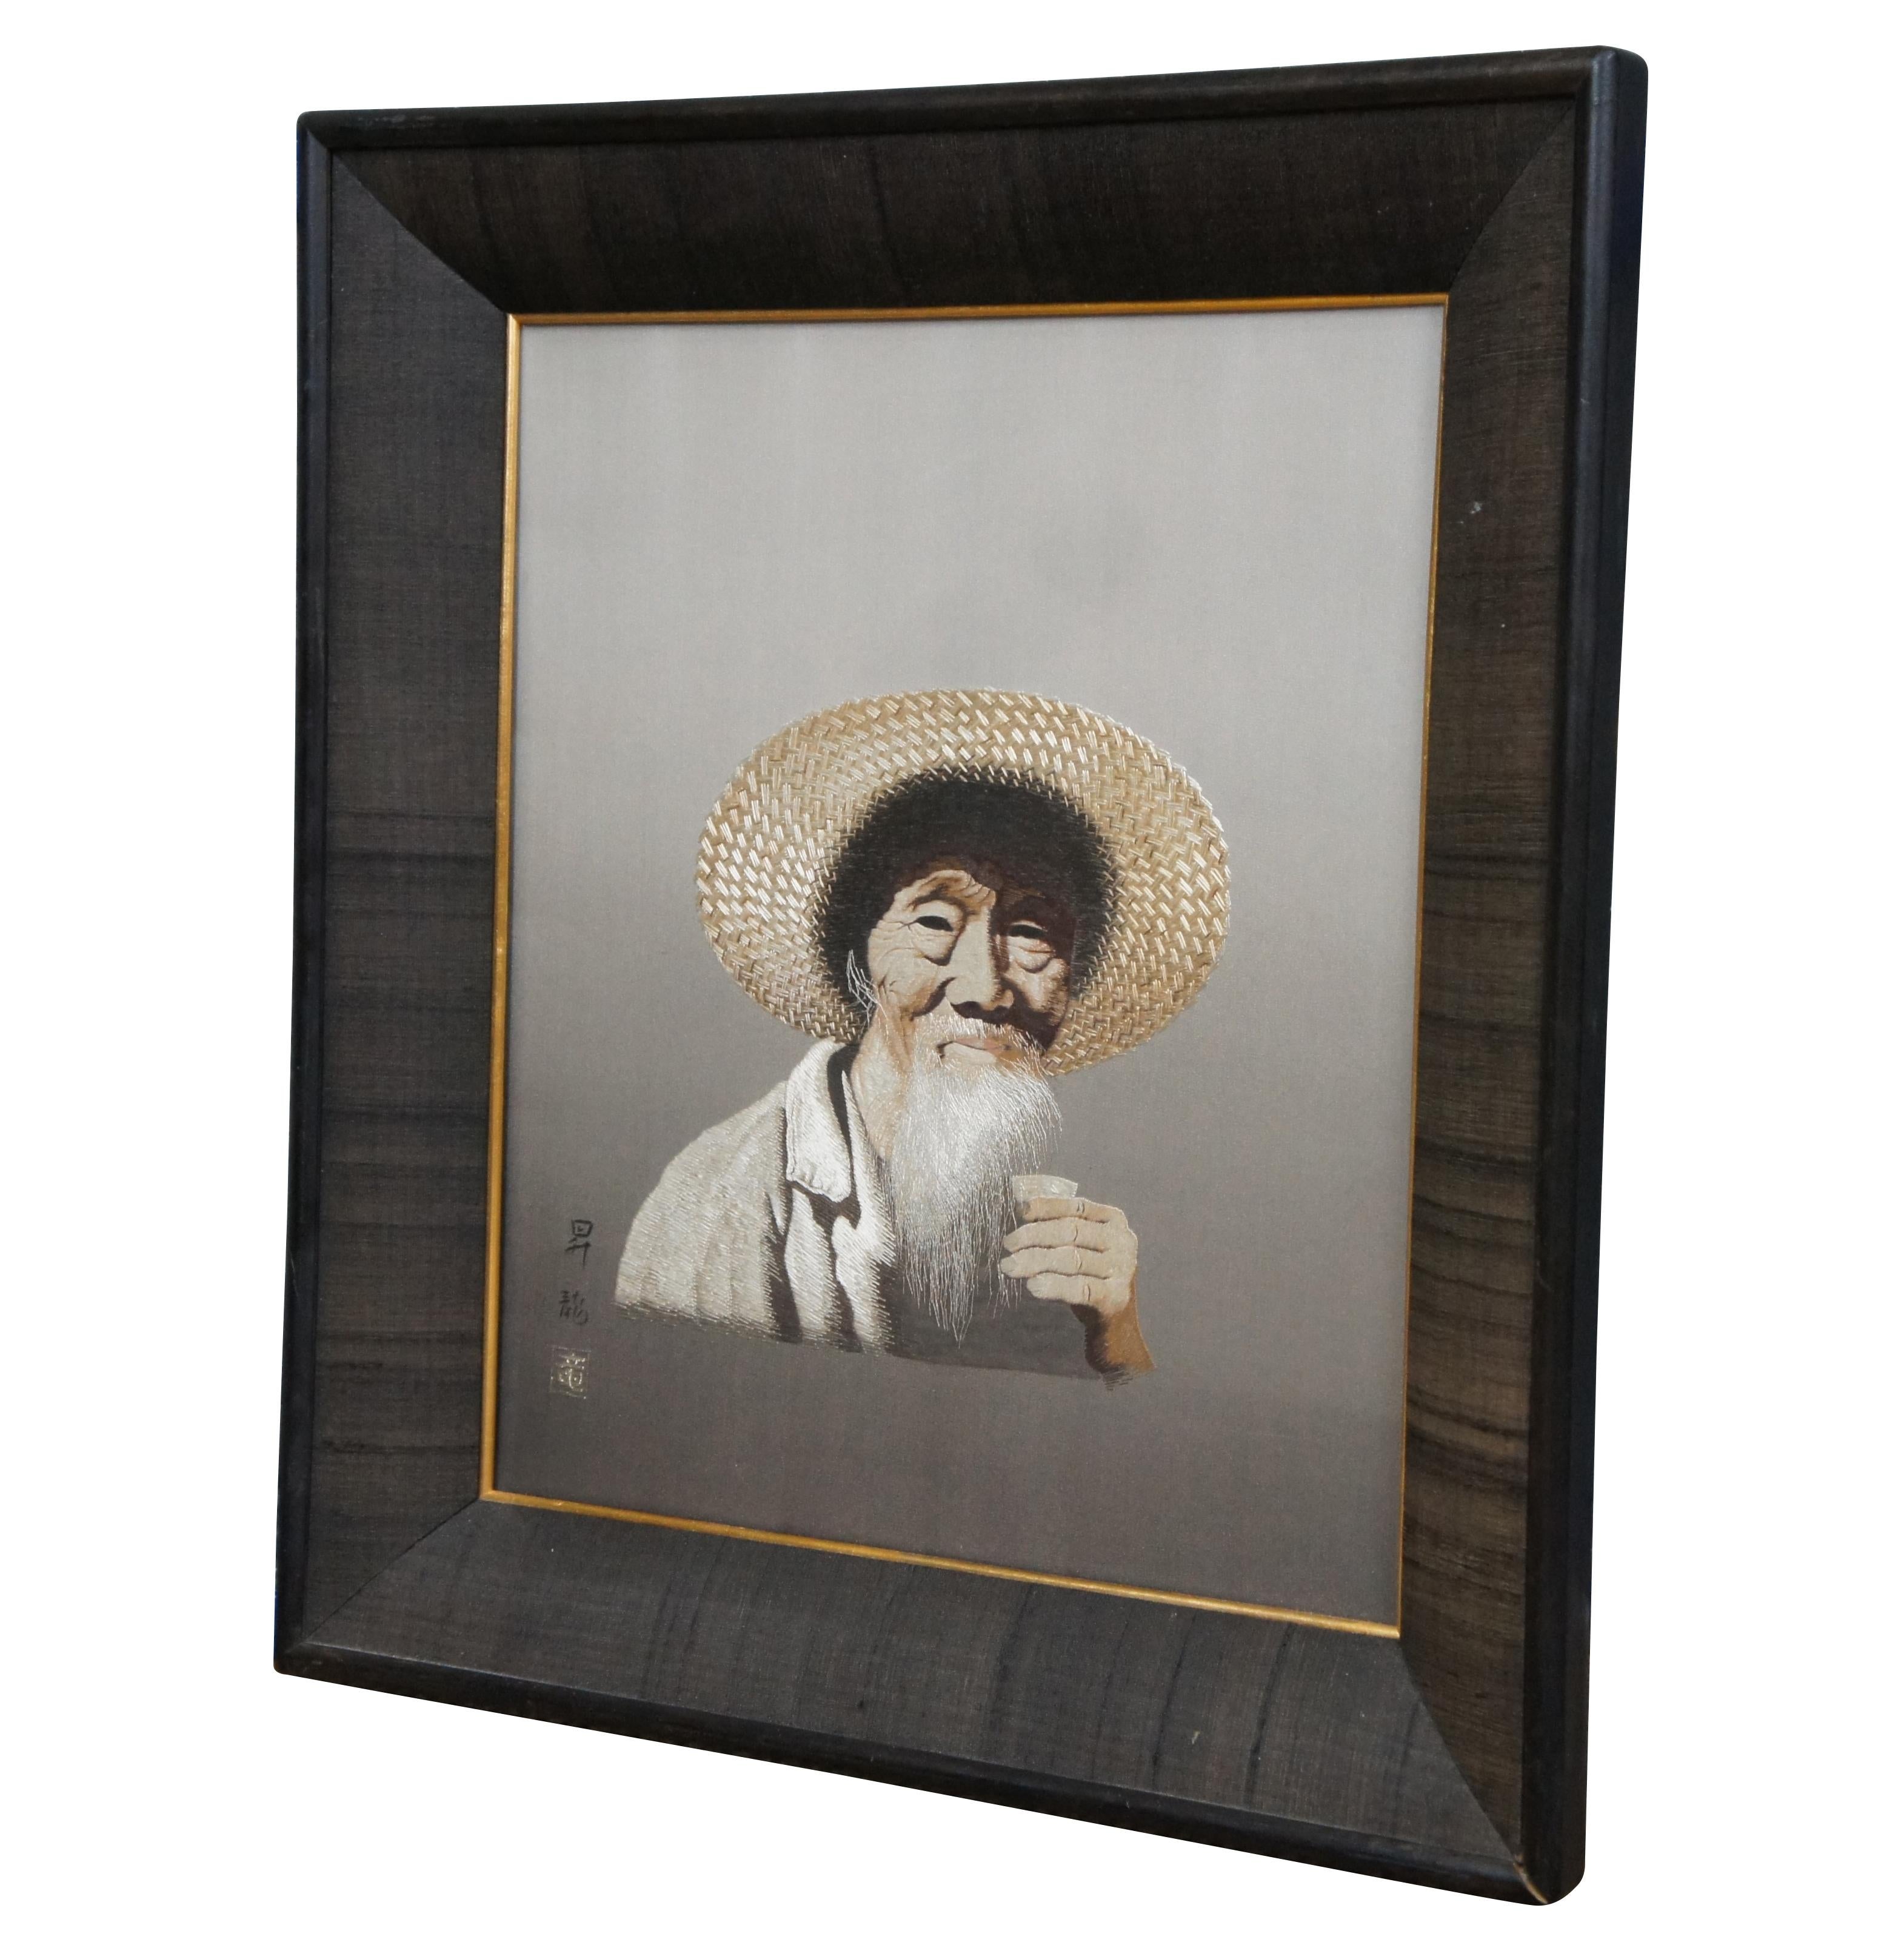 Astonishingly realistic midcentury Japanese embroidered Uchida silk stitched chinoiserie portrait of an old man in a hat, lifting a sake cup. Signed lower right. Translation: ?? is the name, meaning 